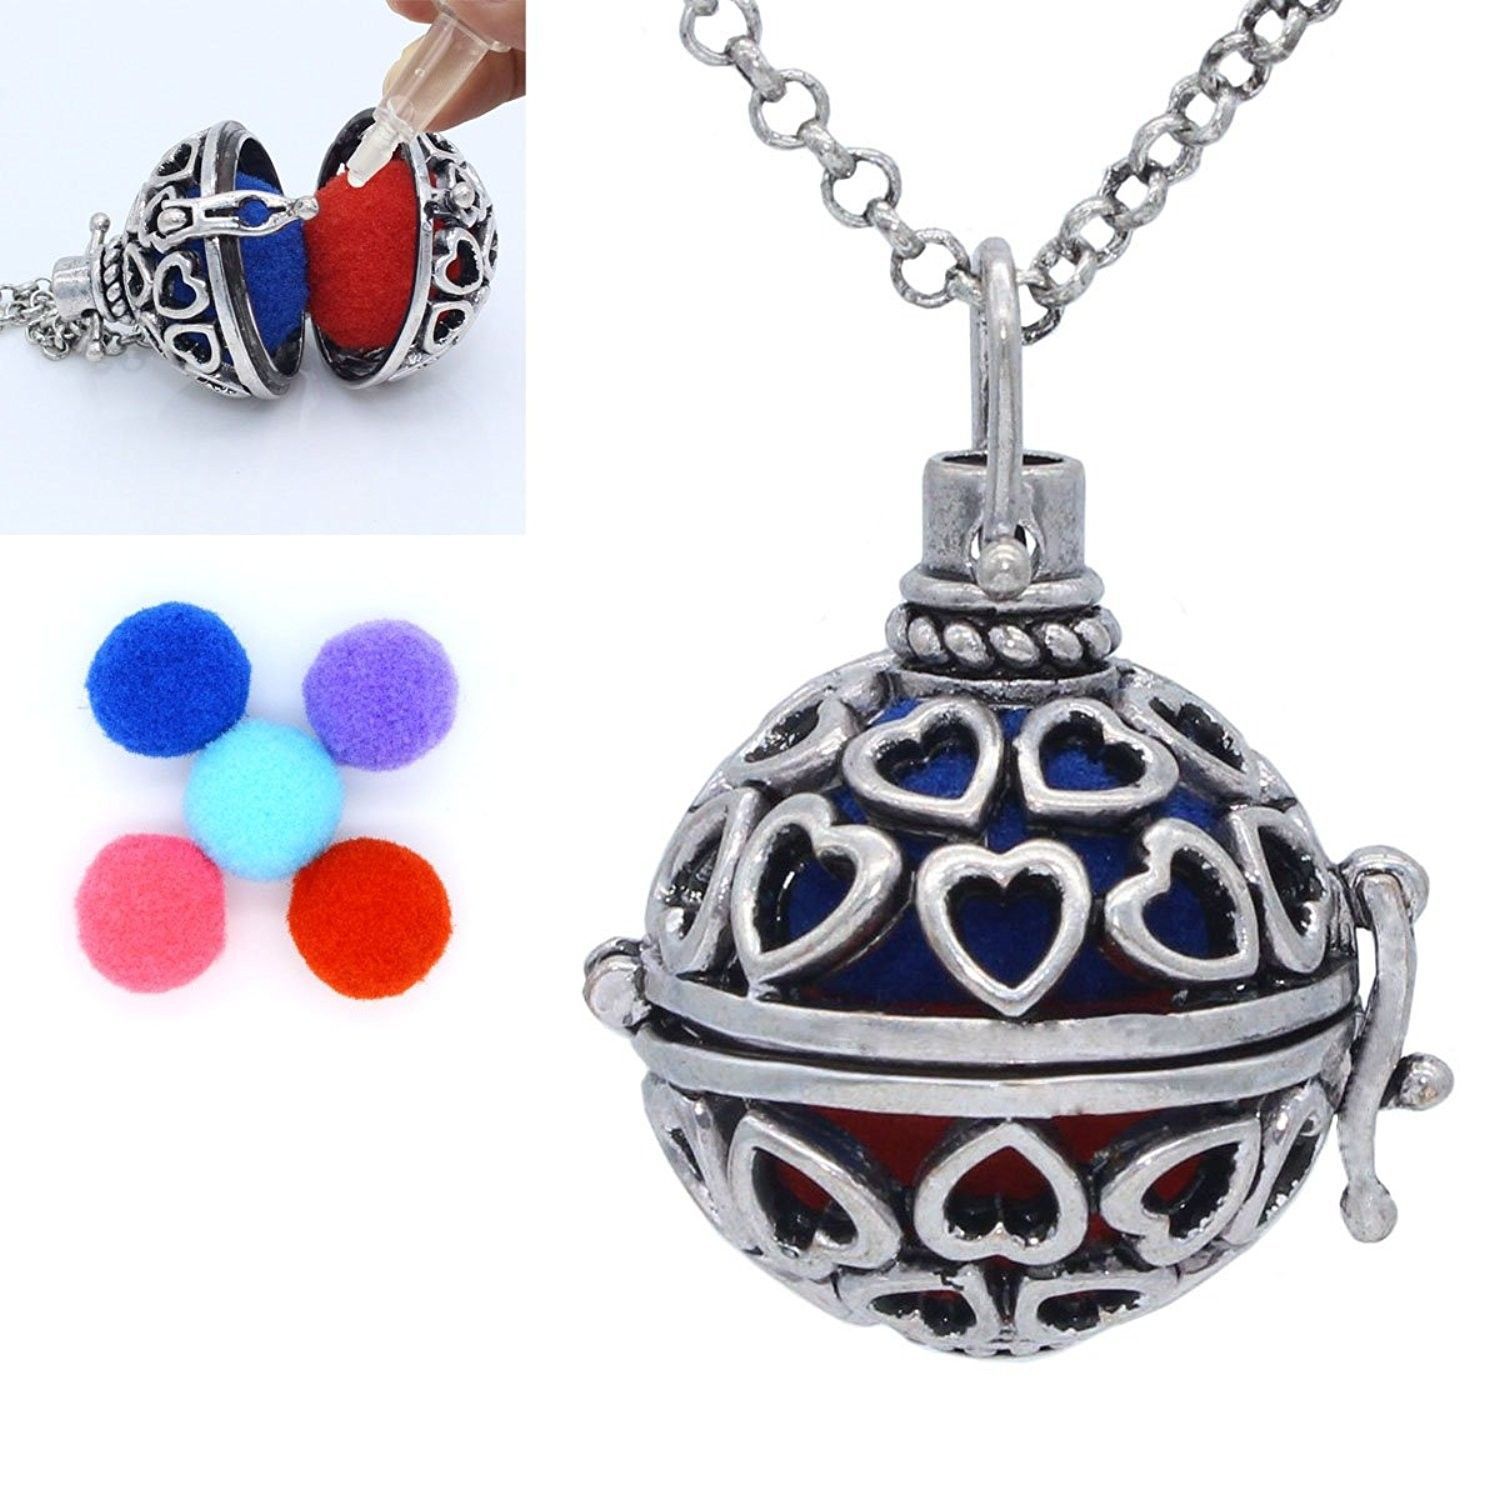 Antique Silver Heart Hollow Locket Essential Oil Diffuser Pendant Regarding Most Recently Released Chiming Filigree Hearts Pendant Necklaces (View 3 of 25)